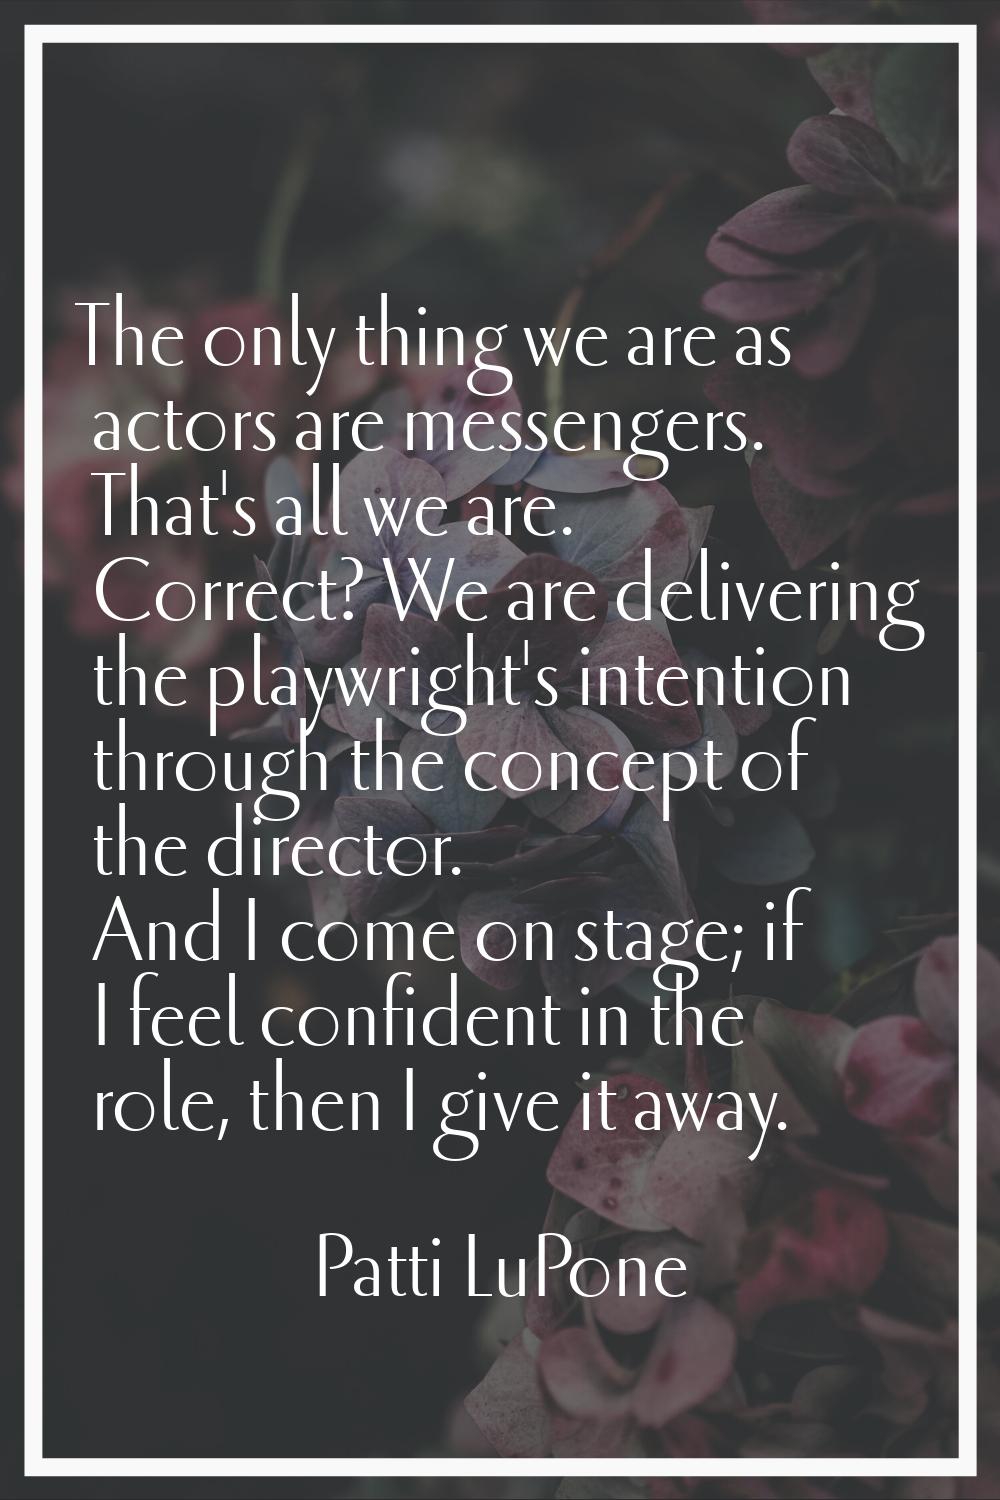 The only thing we are as actors are messengers. That's all we are. Correct? We are delivering the p